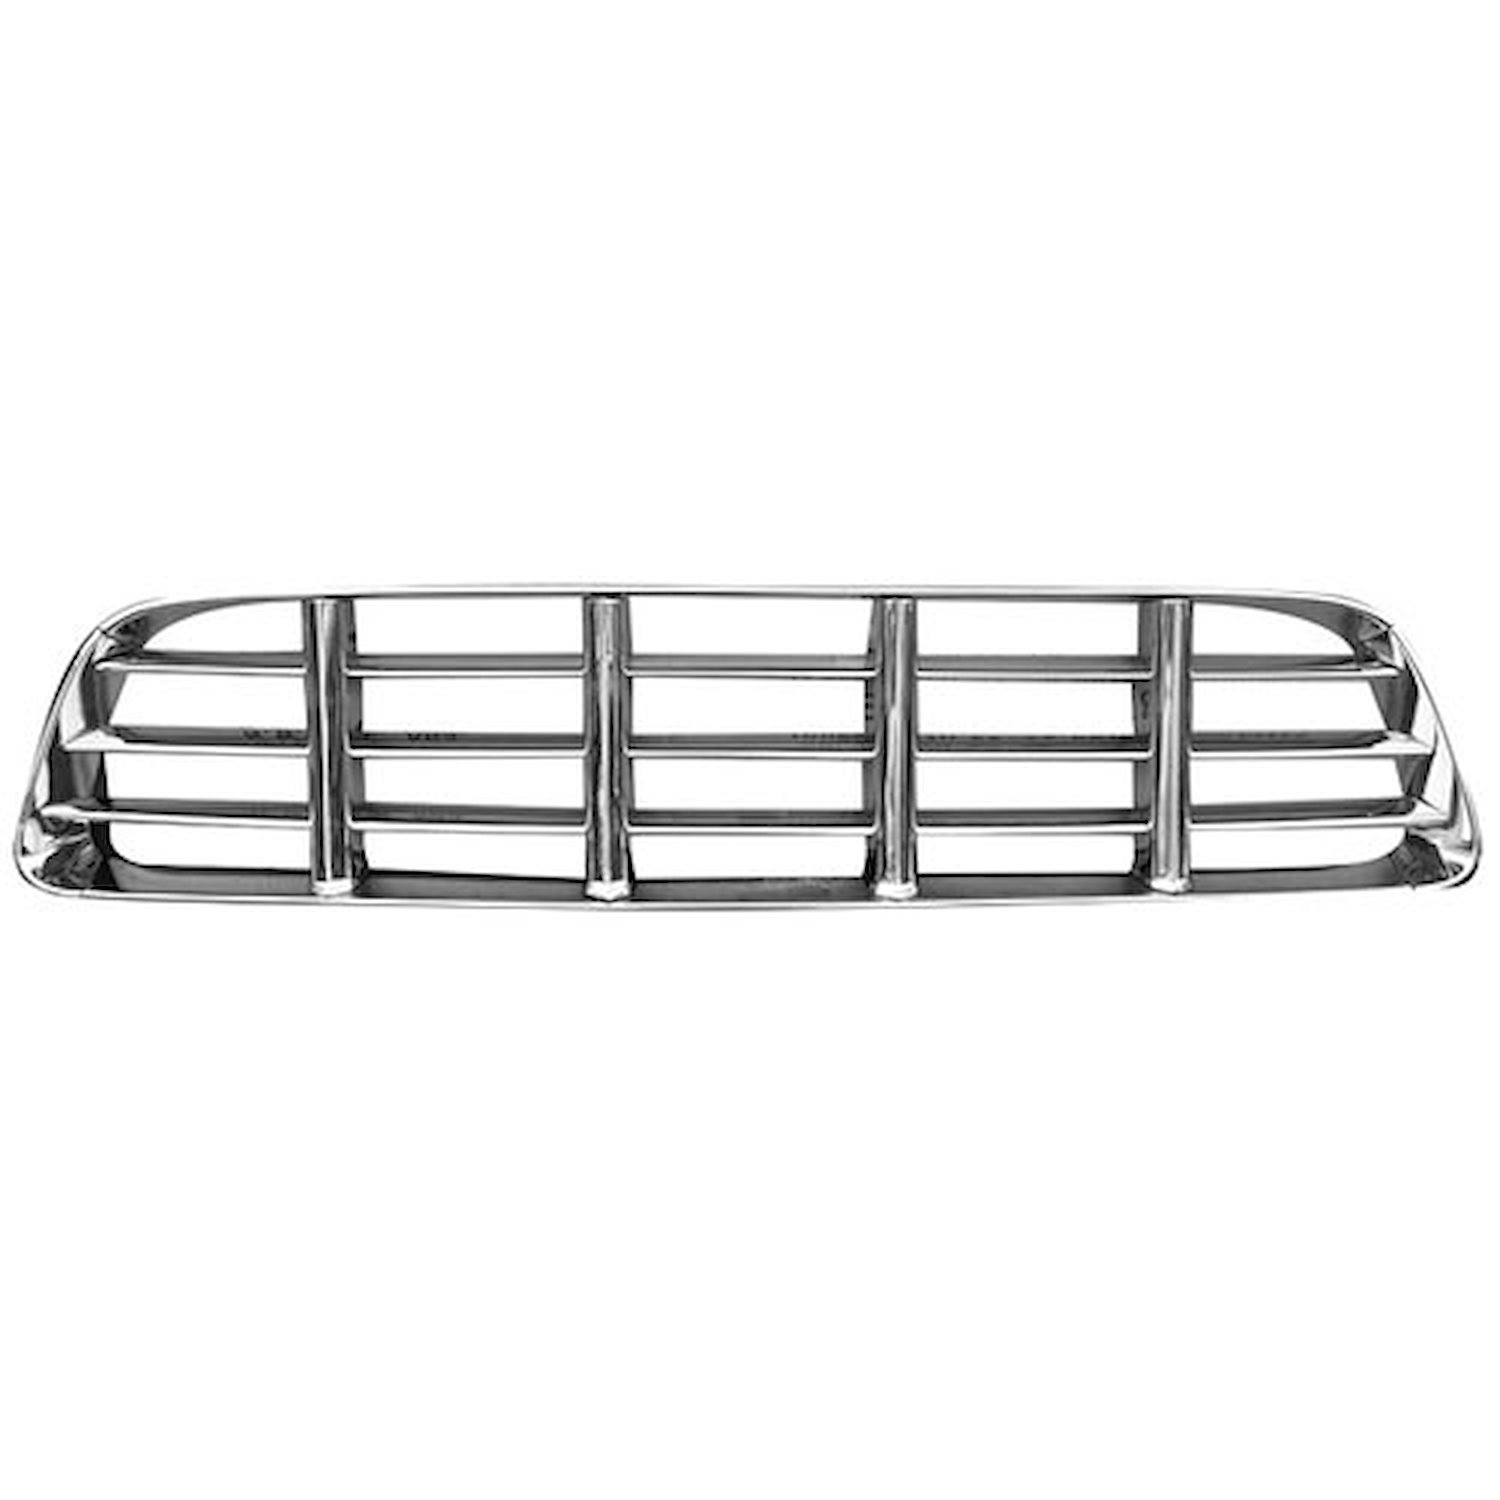 OE Reproduction Grille 1955-1956 Chevrolet Pickup